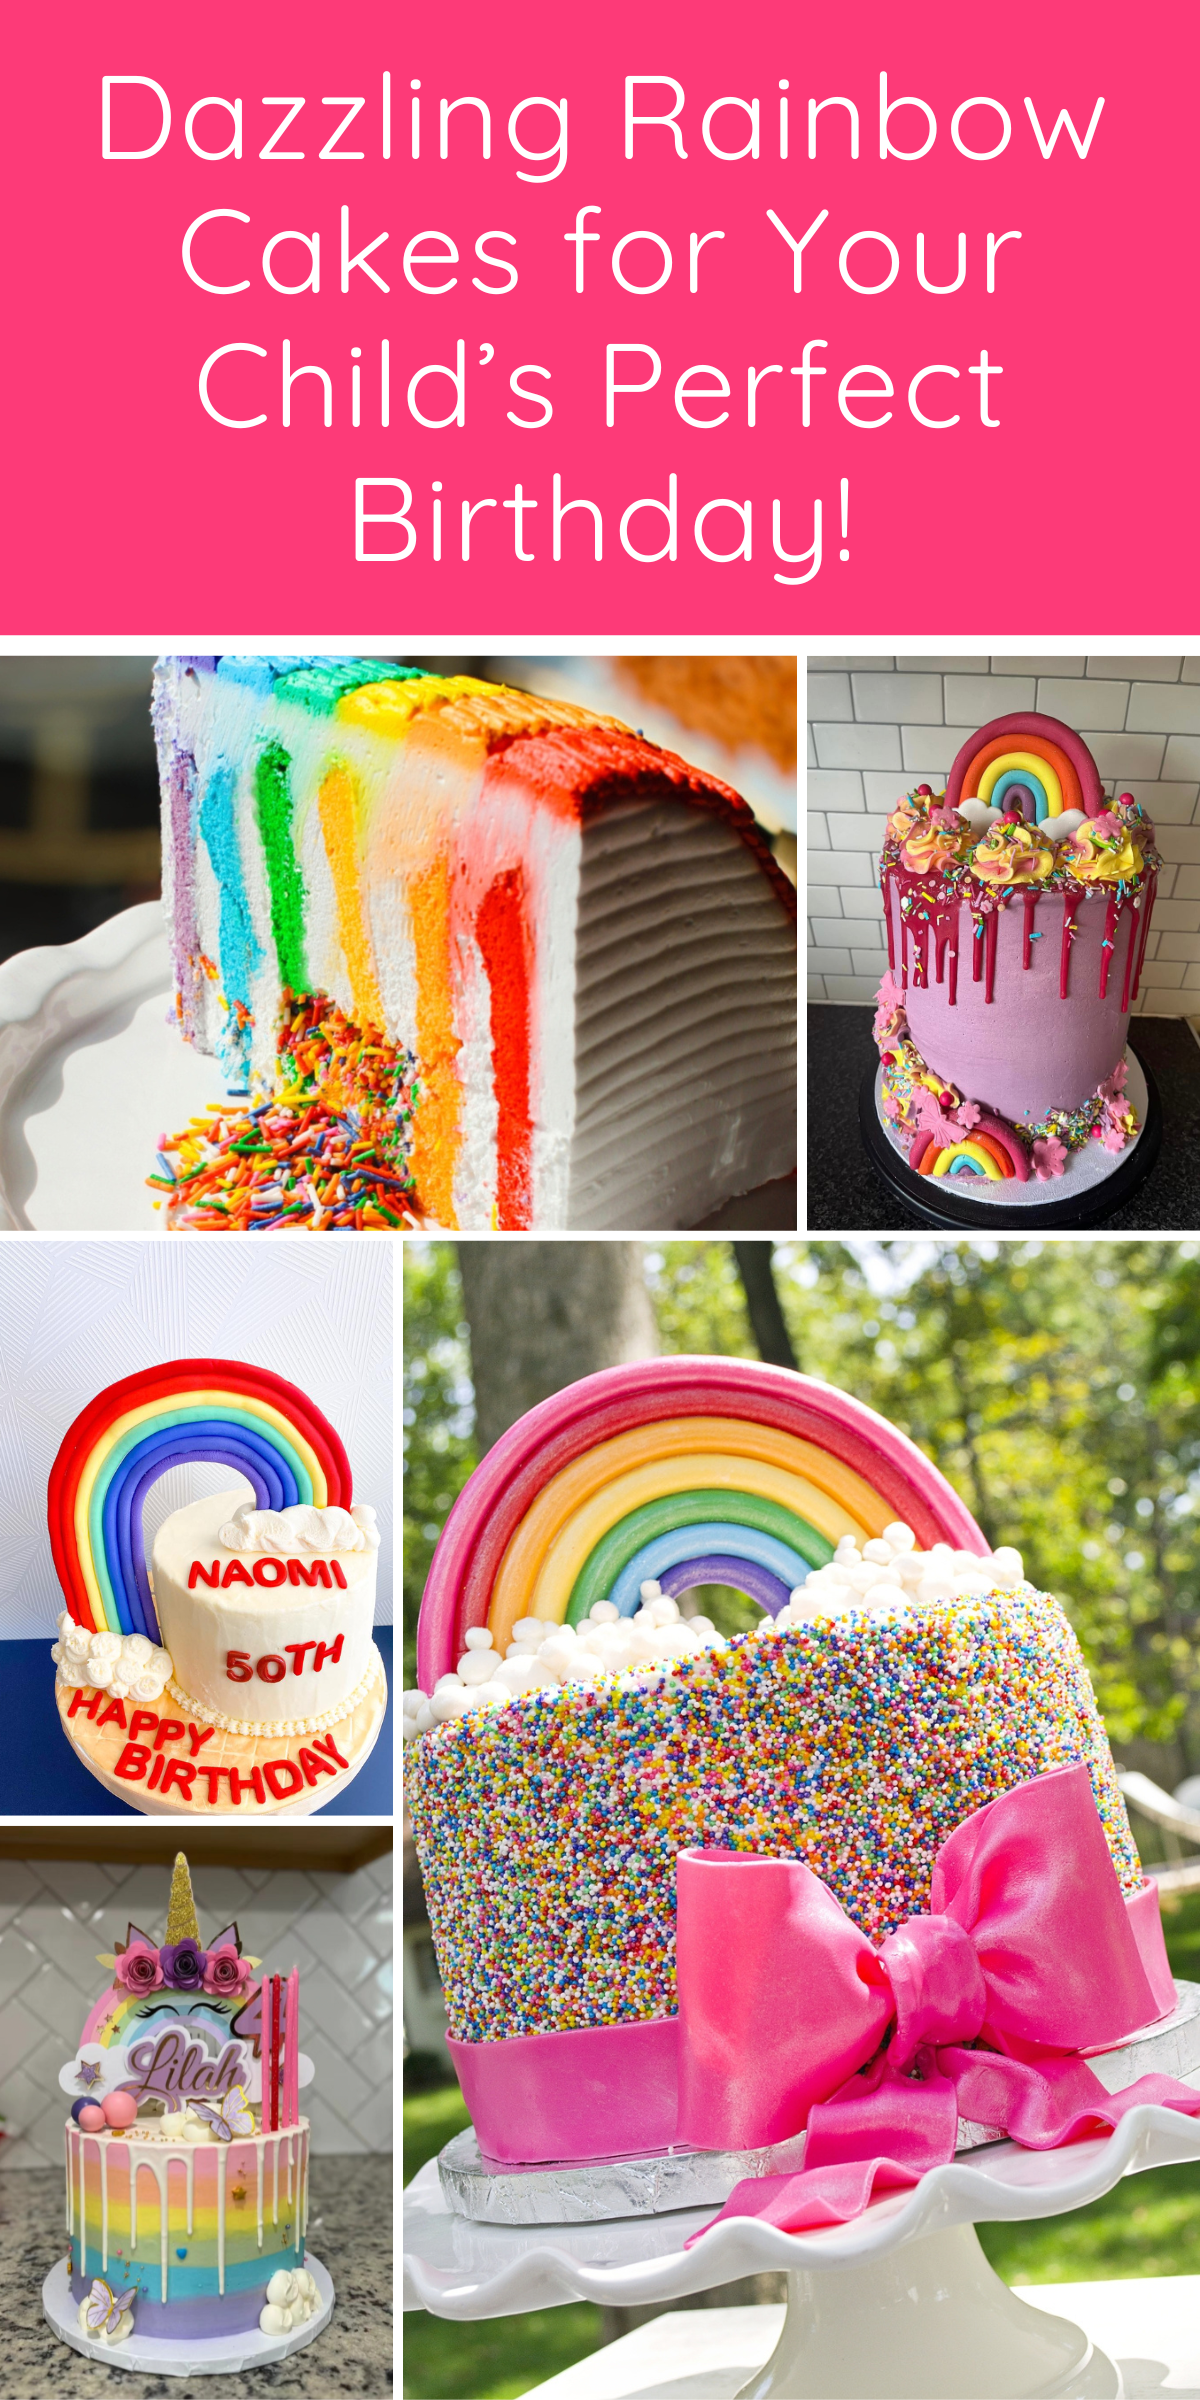 🌈🎂🎉 Dazzling rainbow birthday cake ideas that will bring a burst of color and joy to your celebration.